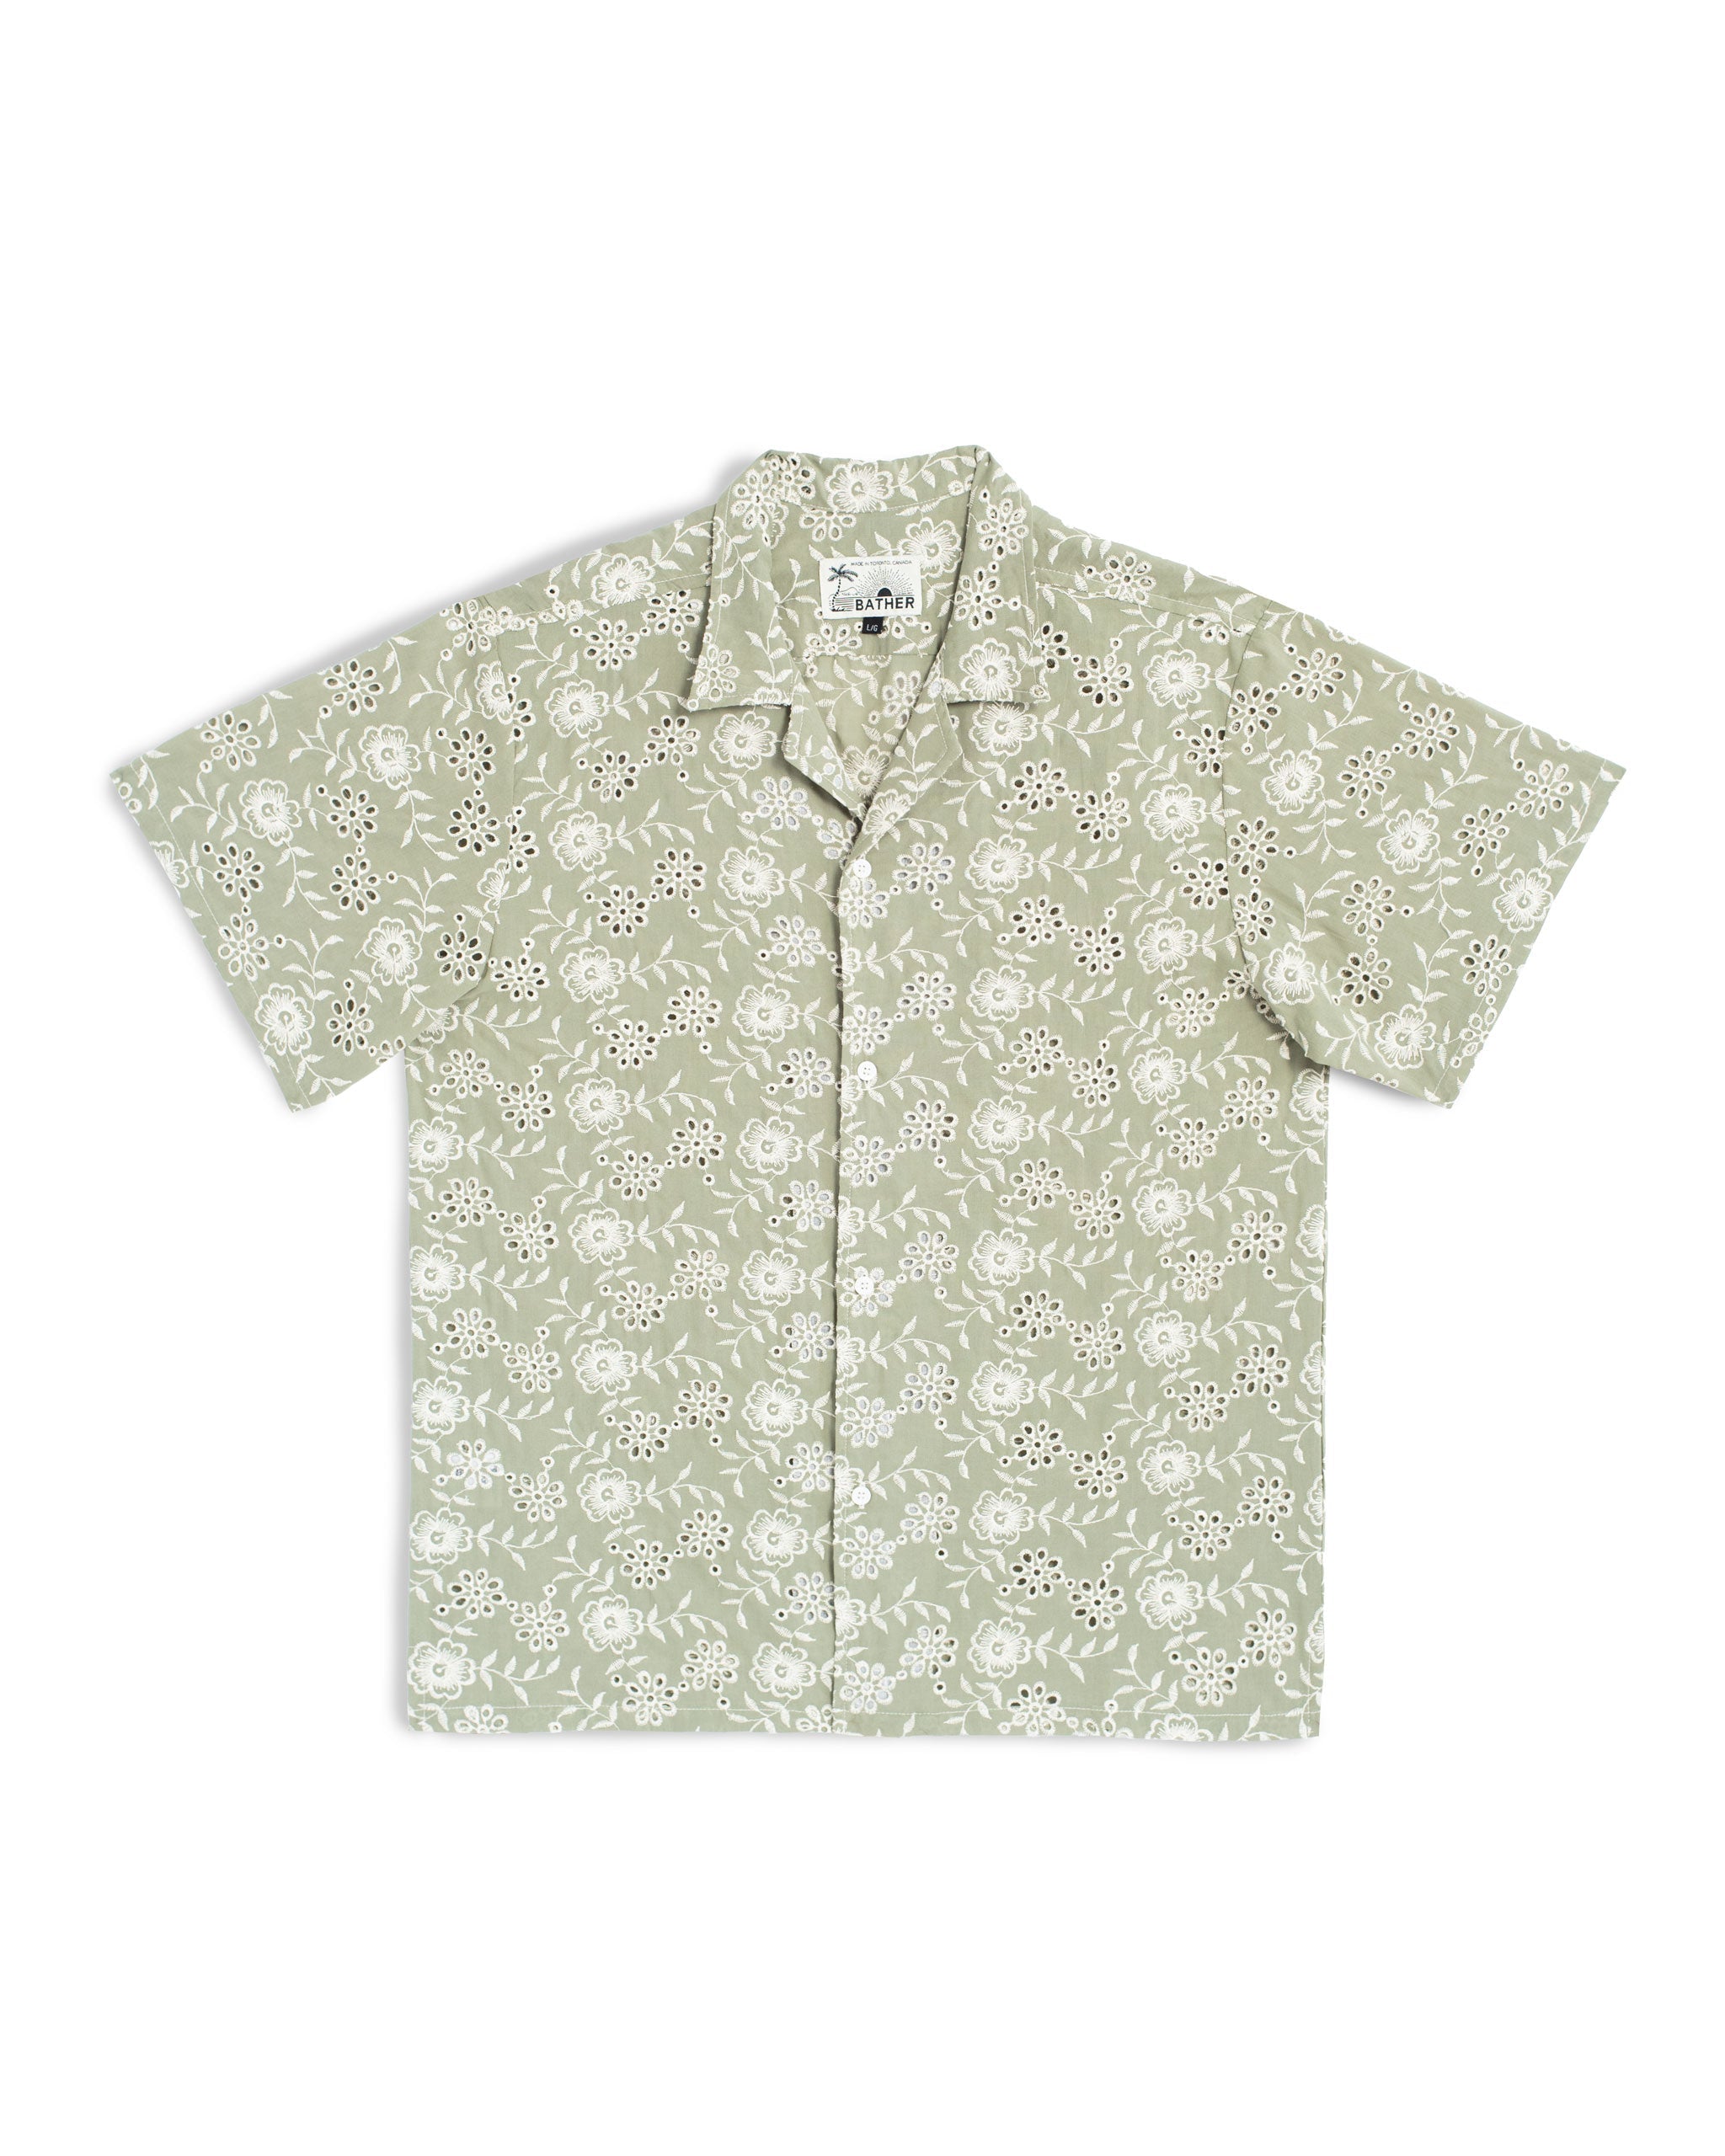 A sage green camp shirt with an all-over embroidered floral pattern